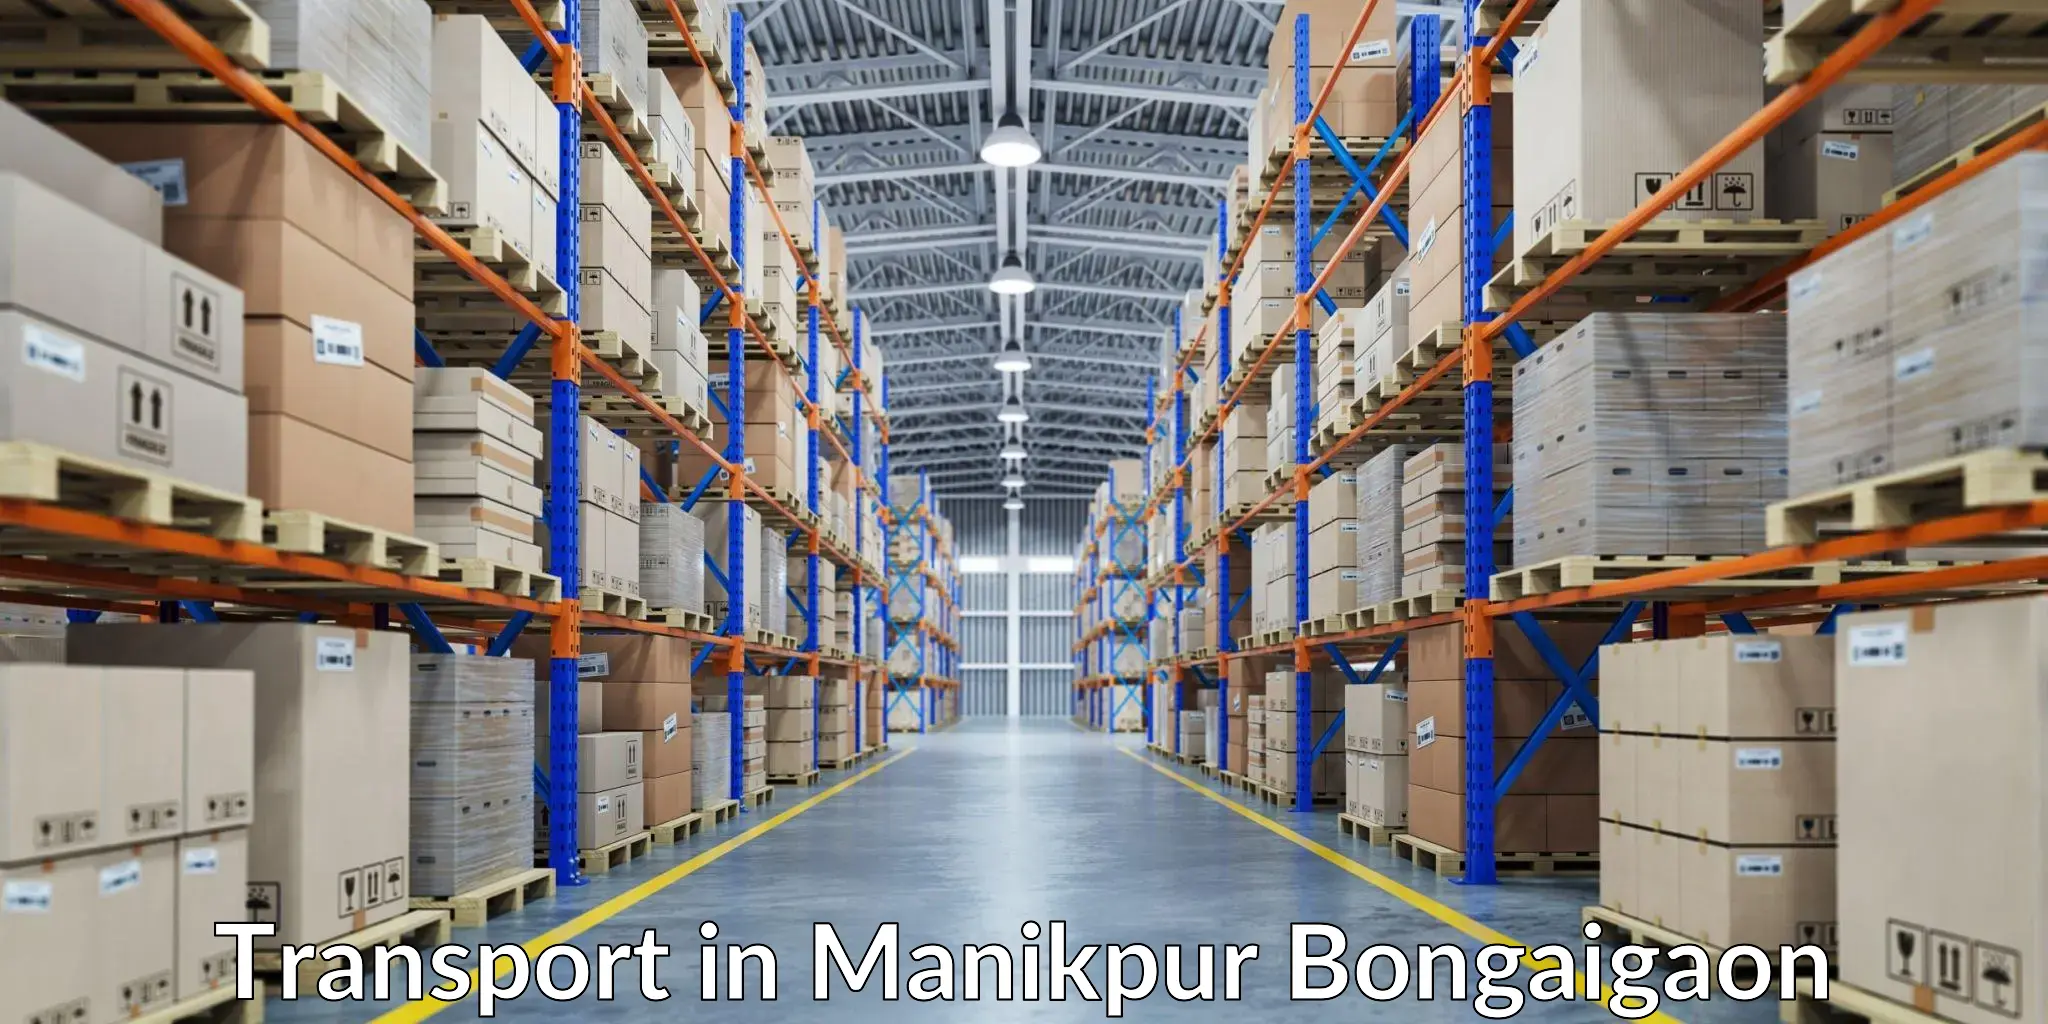 Domestic transport services in Manikpur Bongaigaon